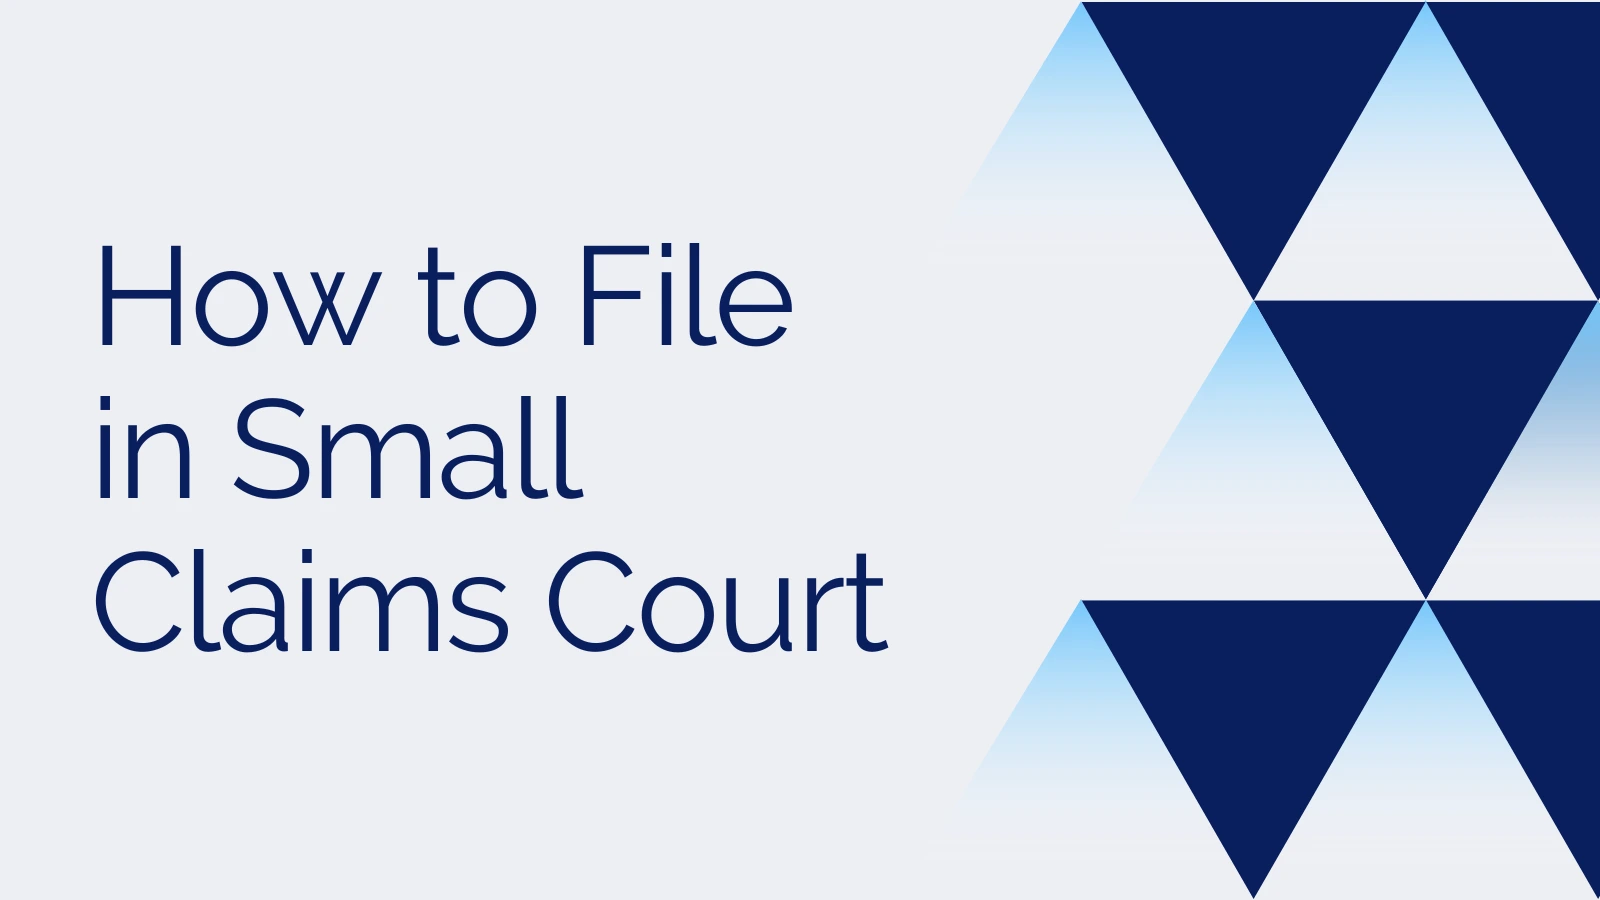 How to File in Small Claims Court